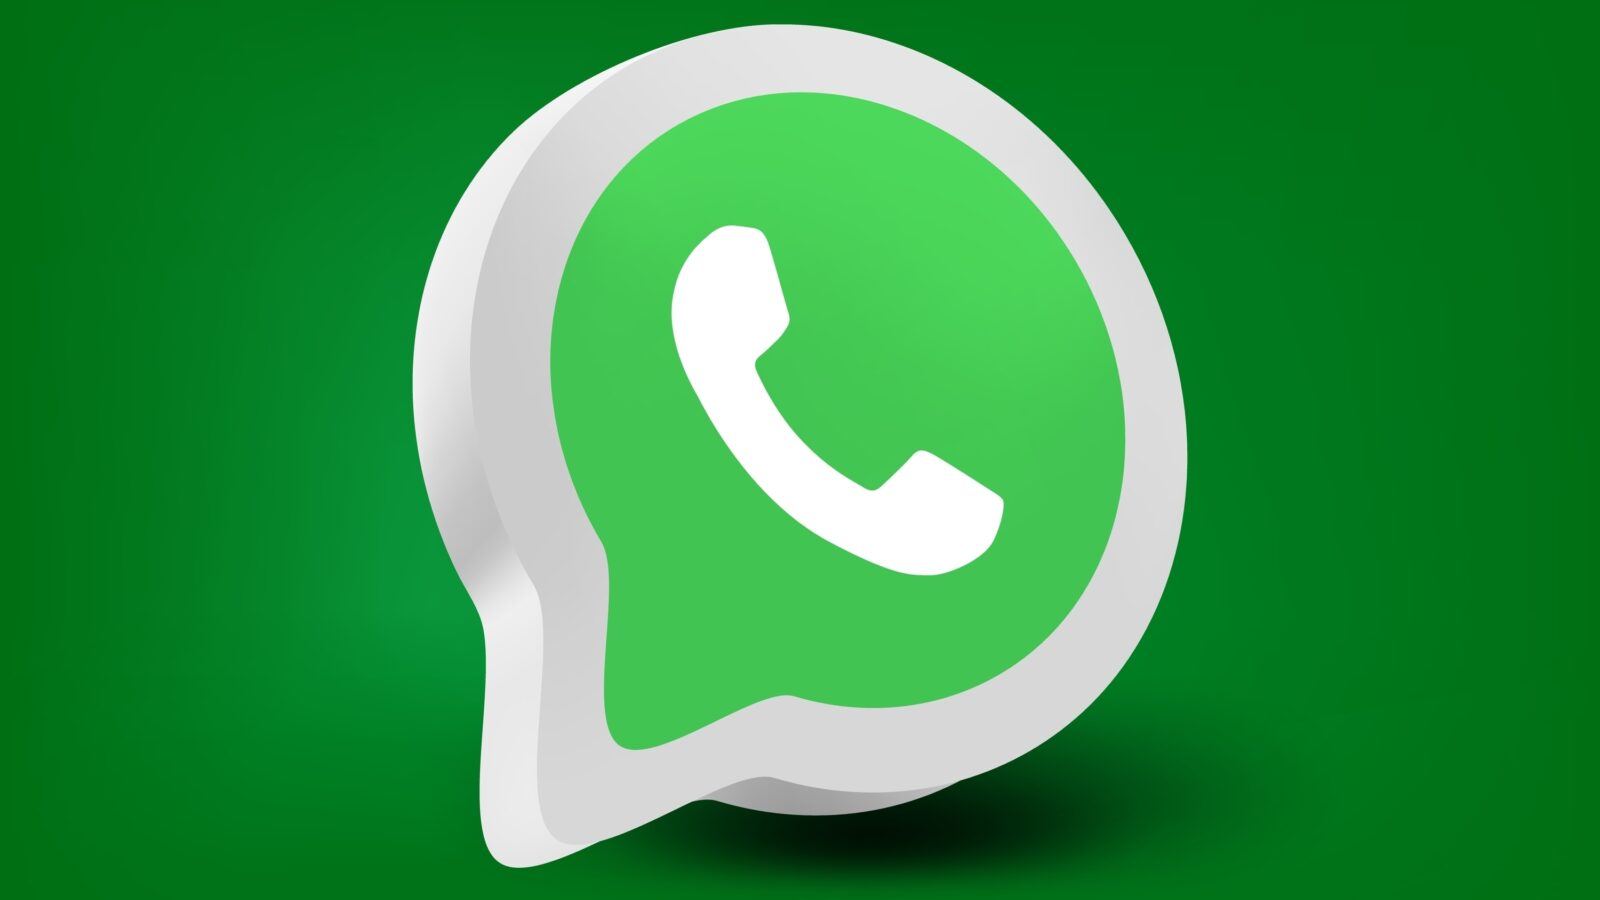 The morning market report: WhatsApp under fire over age limit changes